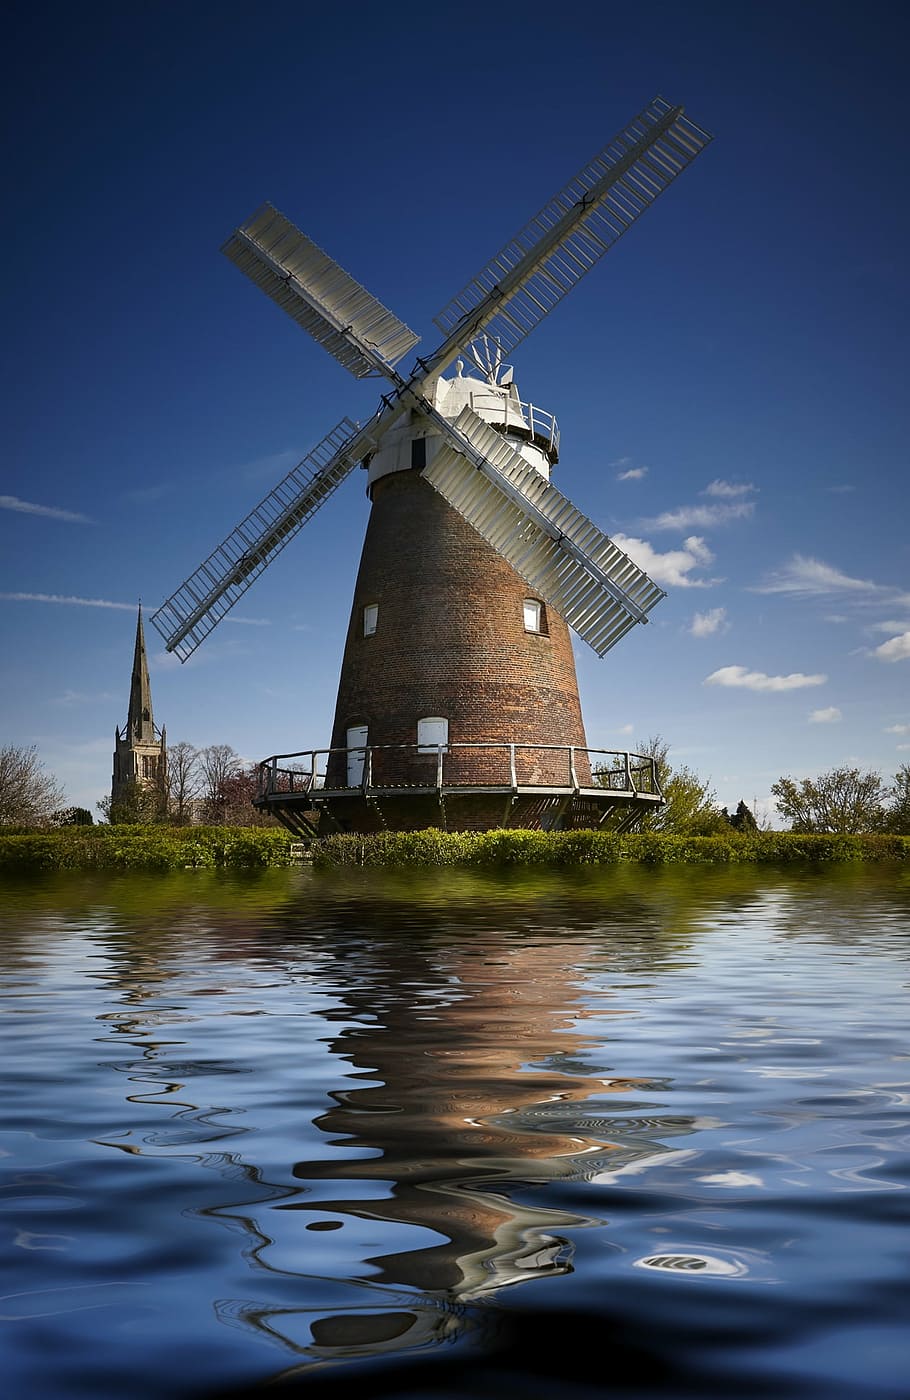 brown windmill beside the body of water, church, agriculture